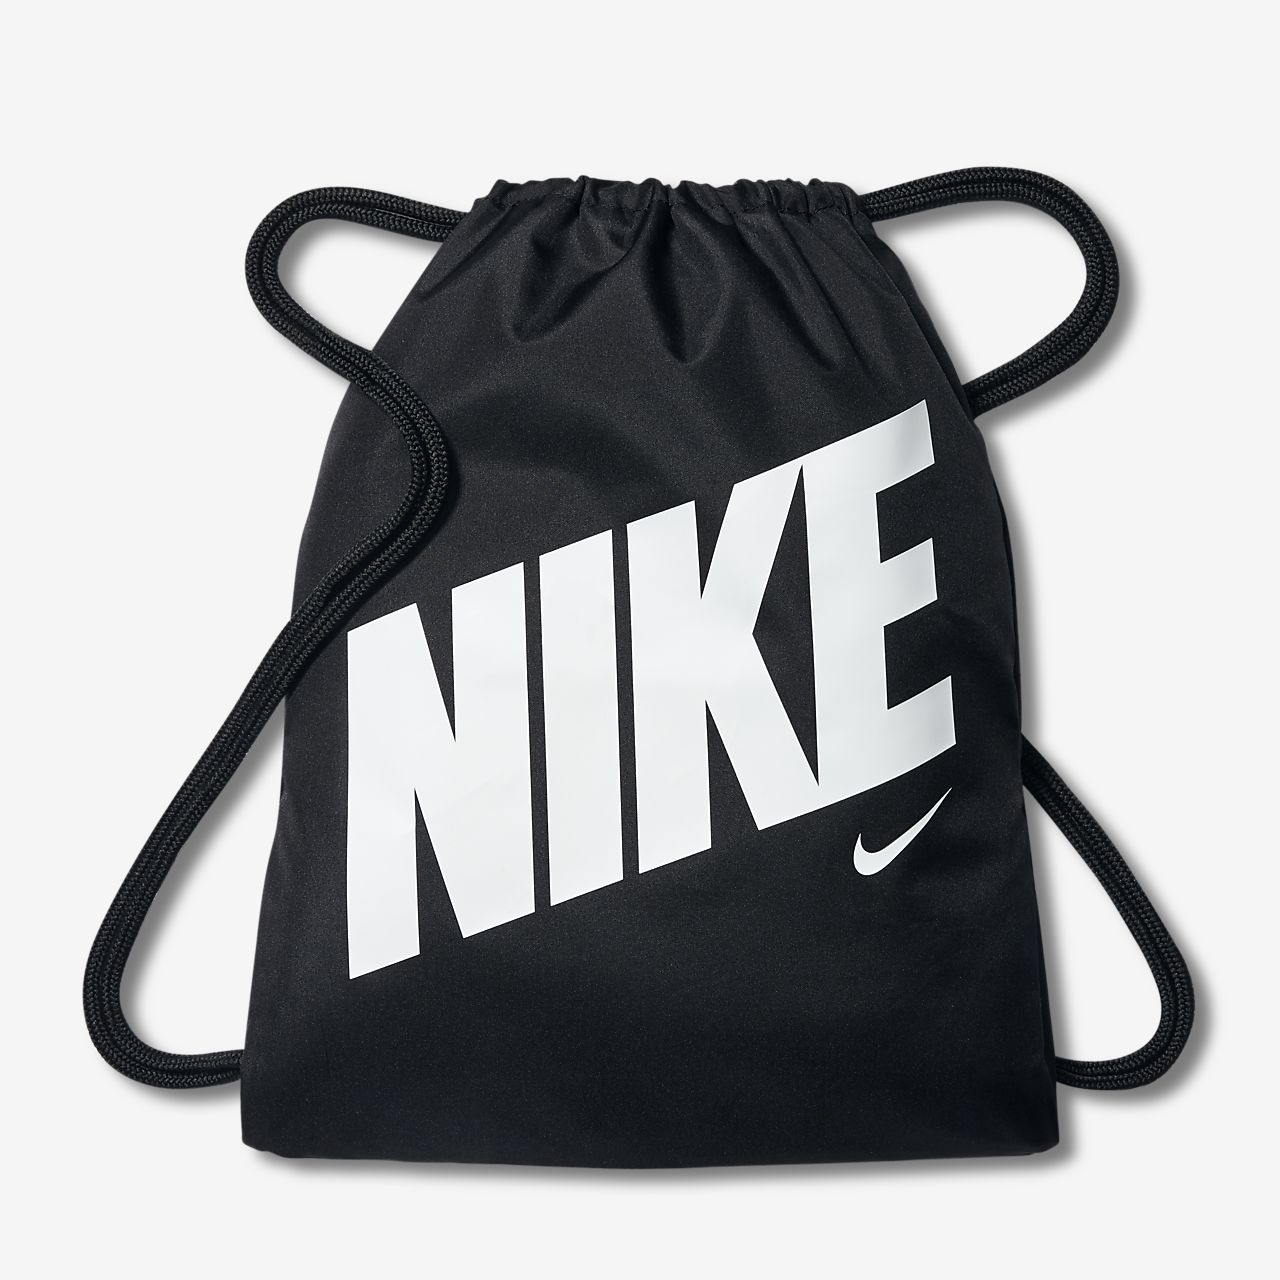 Extra…Extra…Extra! Take an Additional 25% Off ALL Nike Clearance Items